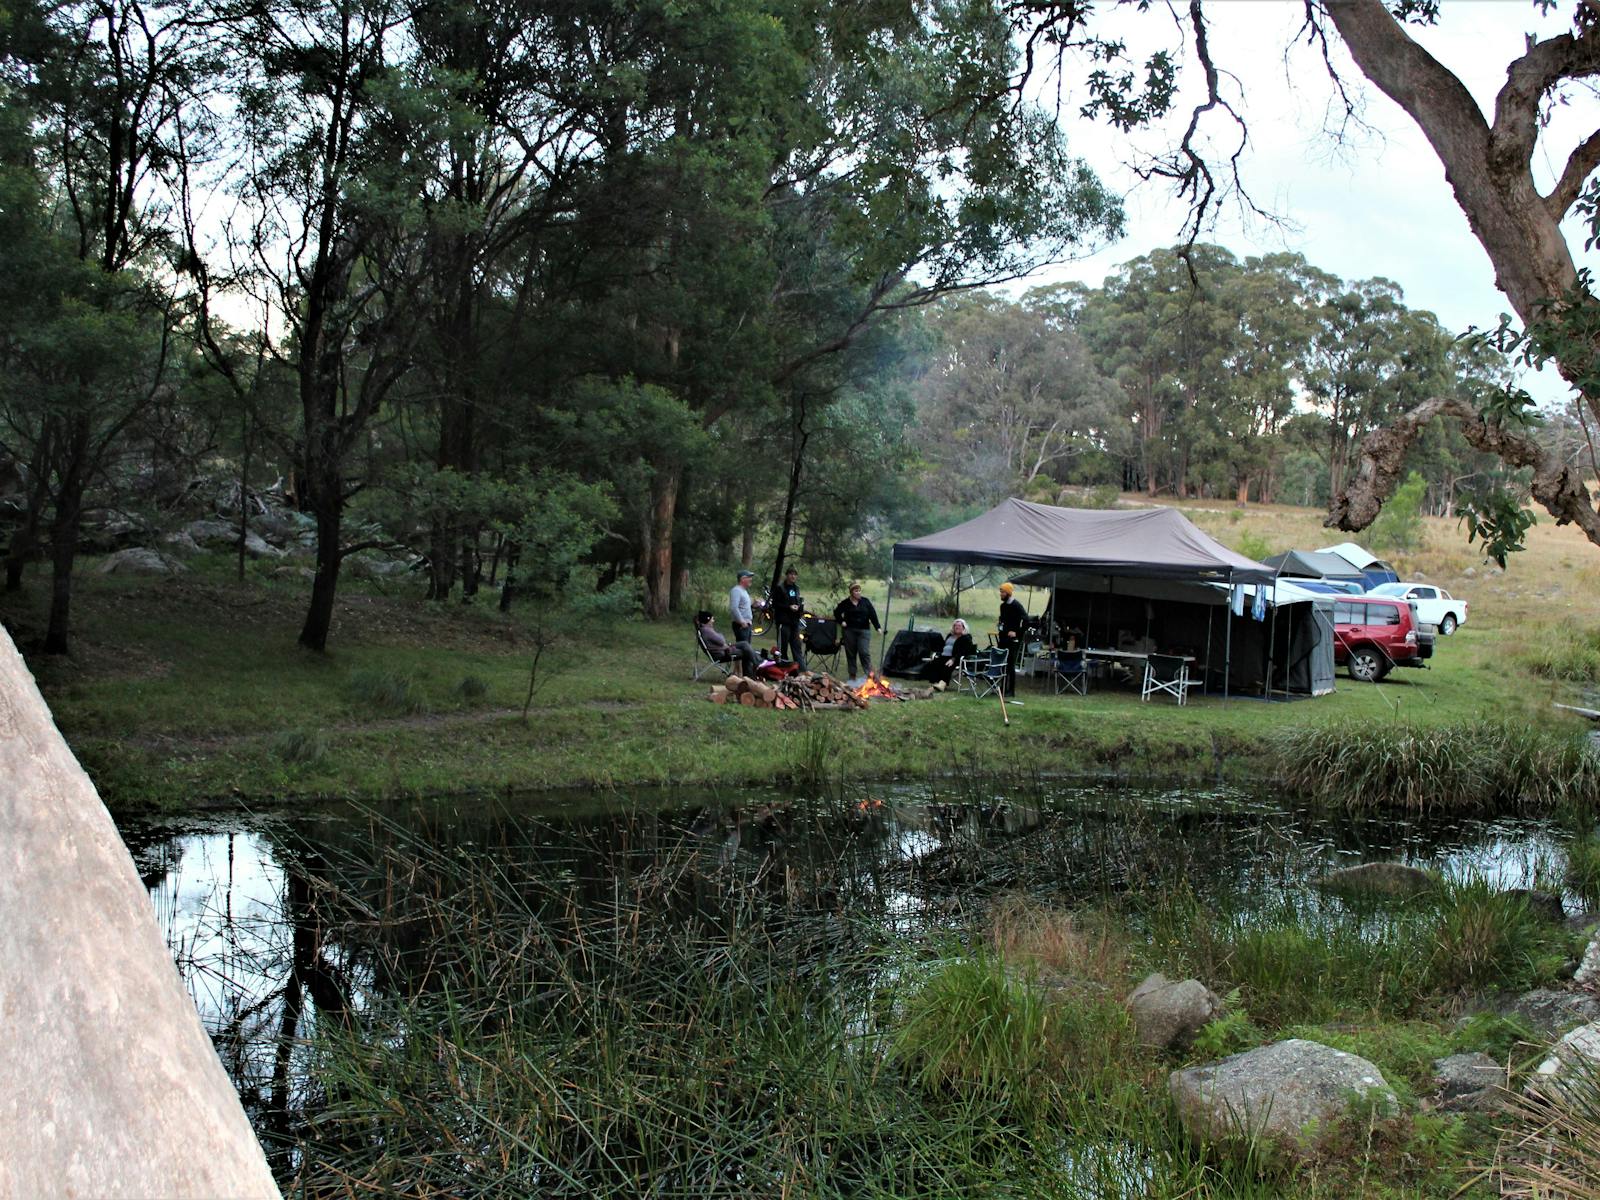 A campertrailer beside the water at one of our sites.